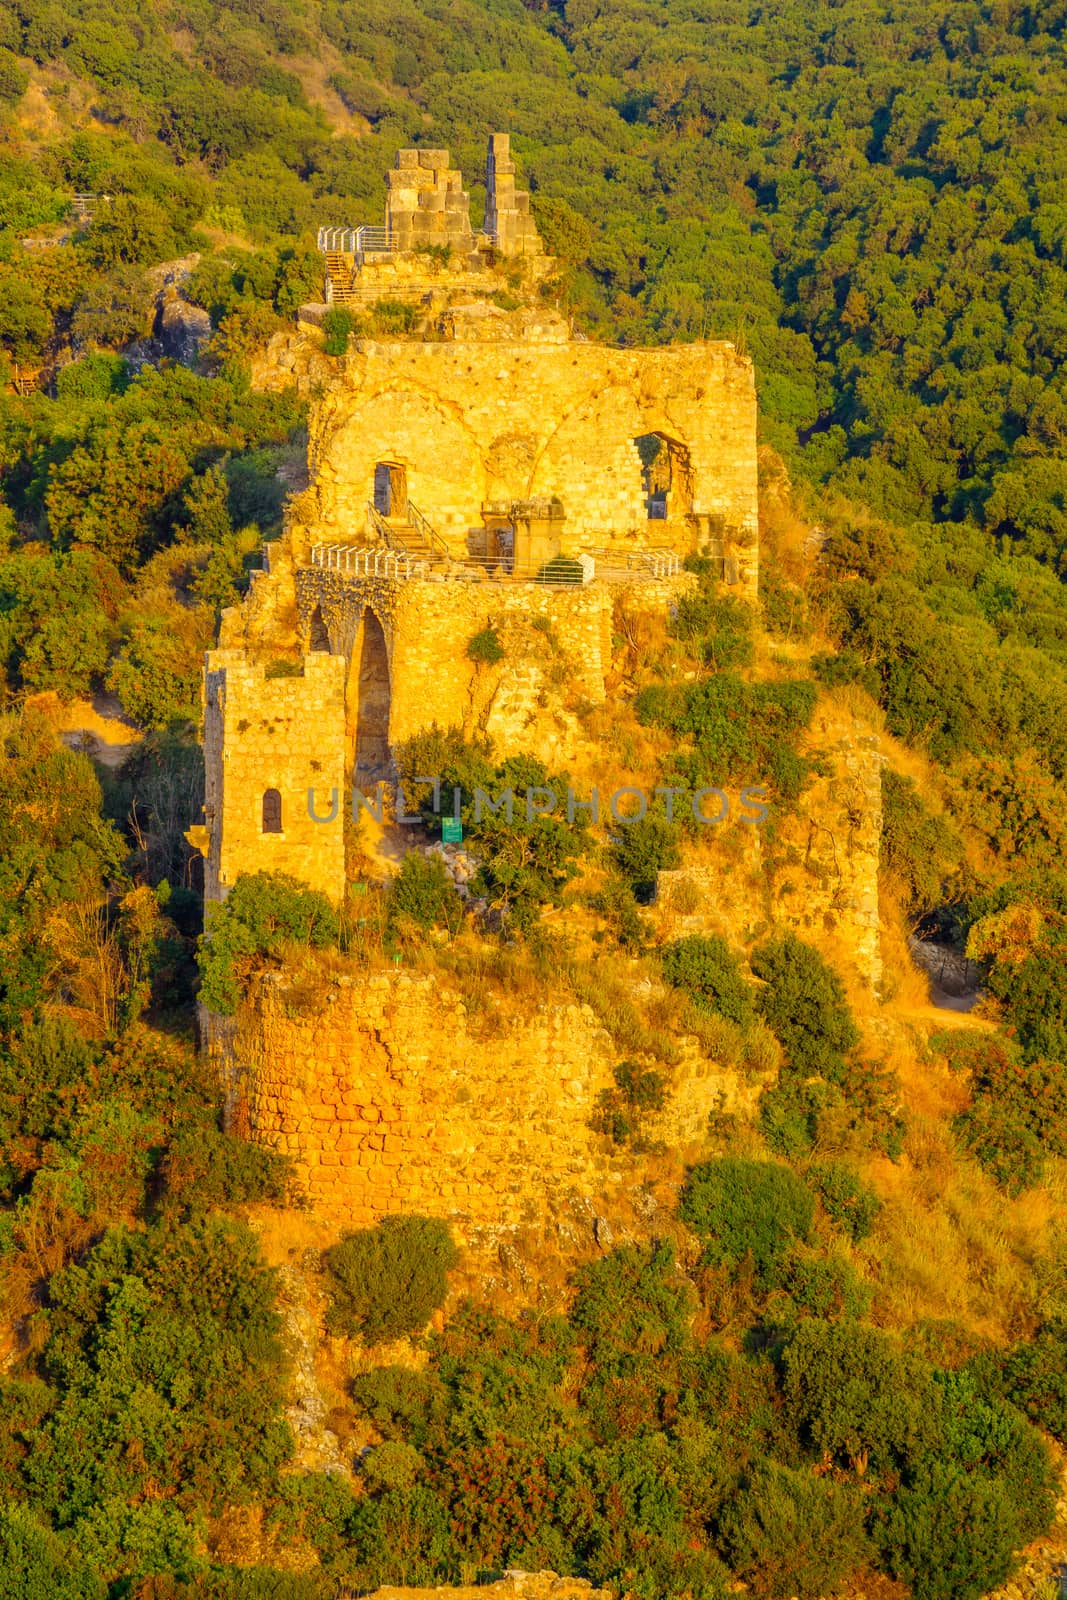 View of the Montfort Fortress, crusader castle in Northern Israel